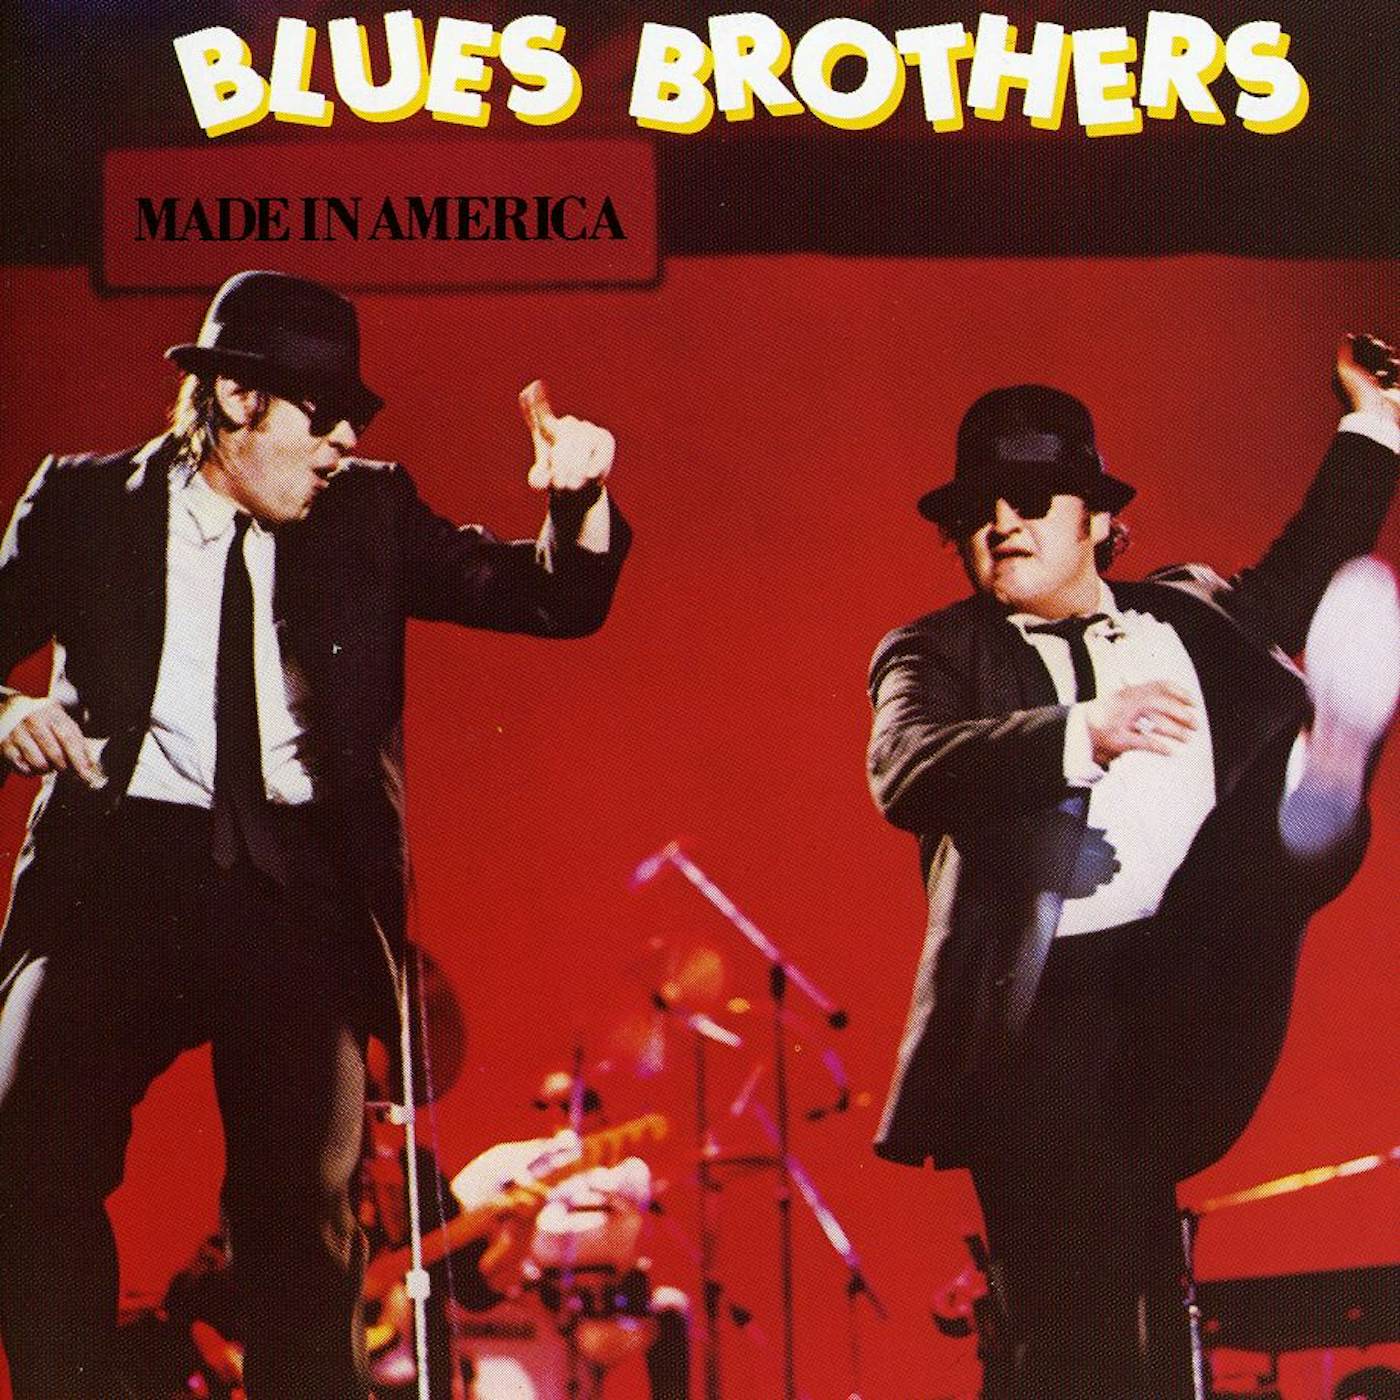 The Blues & Brothers MADE IN AMERICA CD